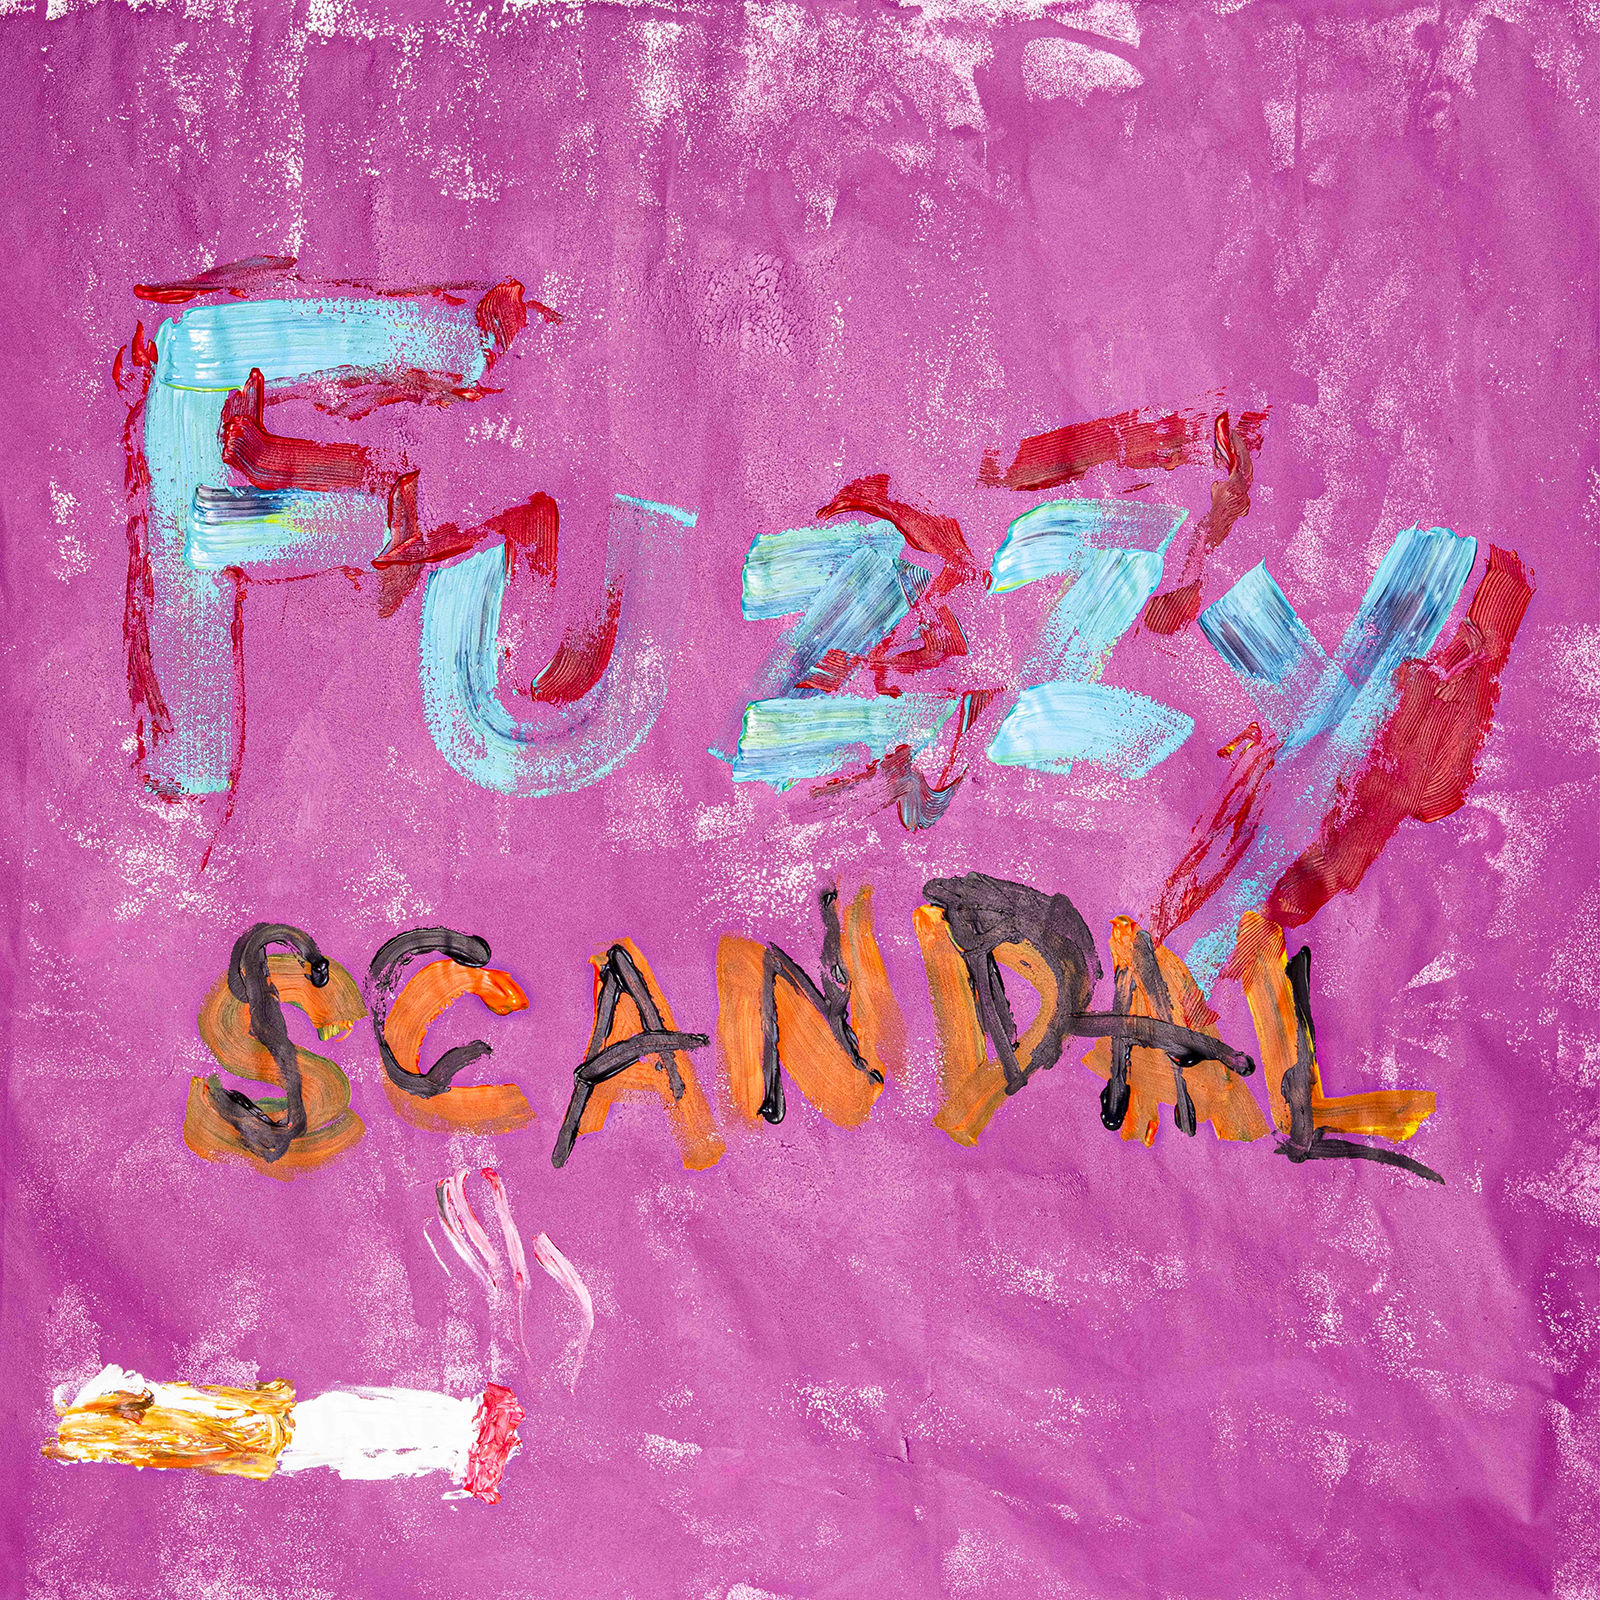 Fuzzy + June 2019 Promo Pictures 5d3fe289b8261-S8580-SCANDAL-Fuzzy-5d3fe289df6a2